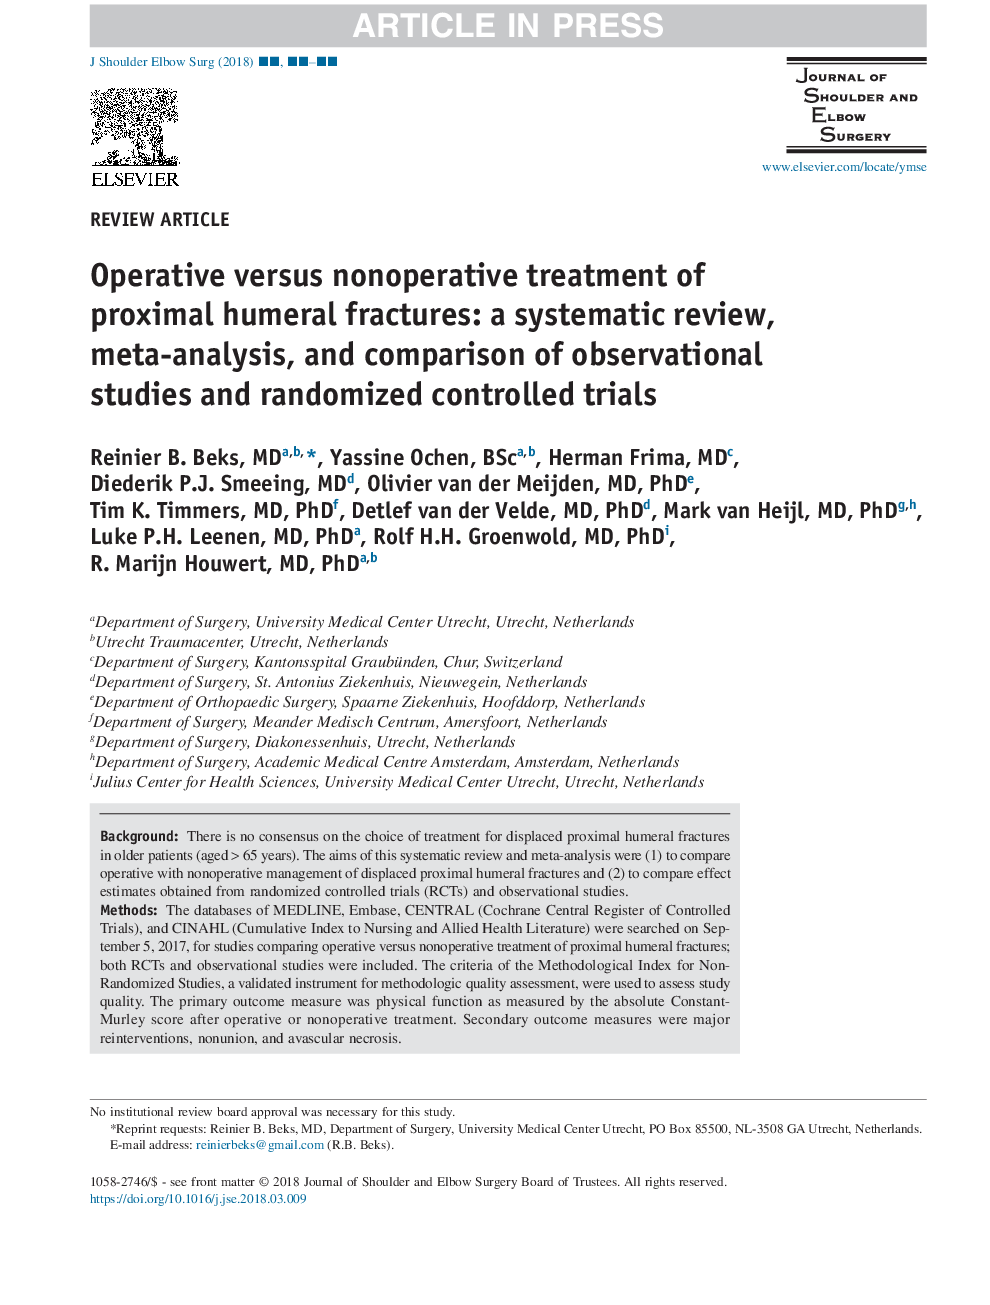 Operative versus nonoperative treatment of proximal humeral fractures: a systematic review, meta-analysis, and comparison of observational studies and randomized controlled trials